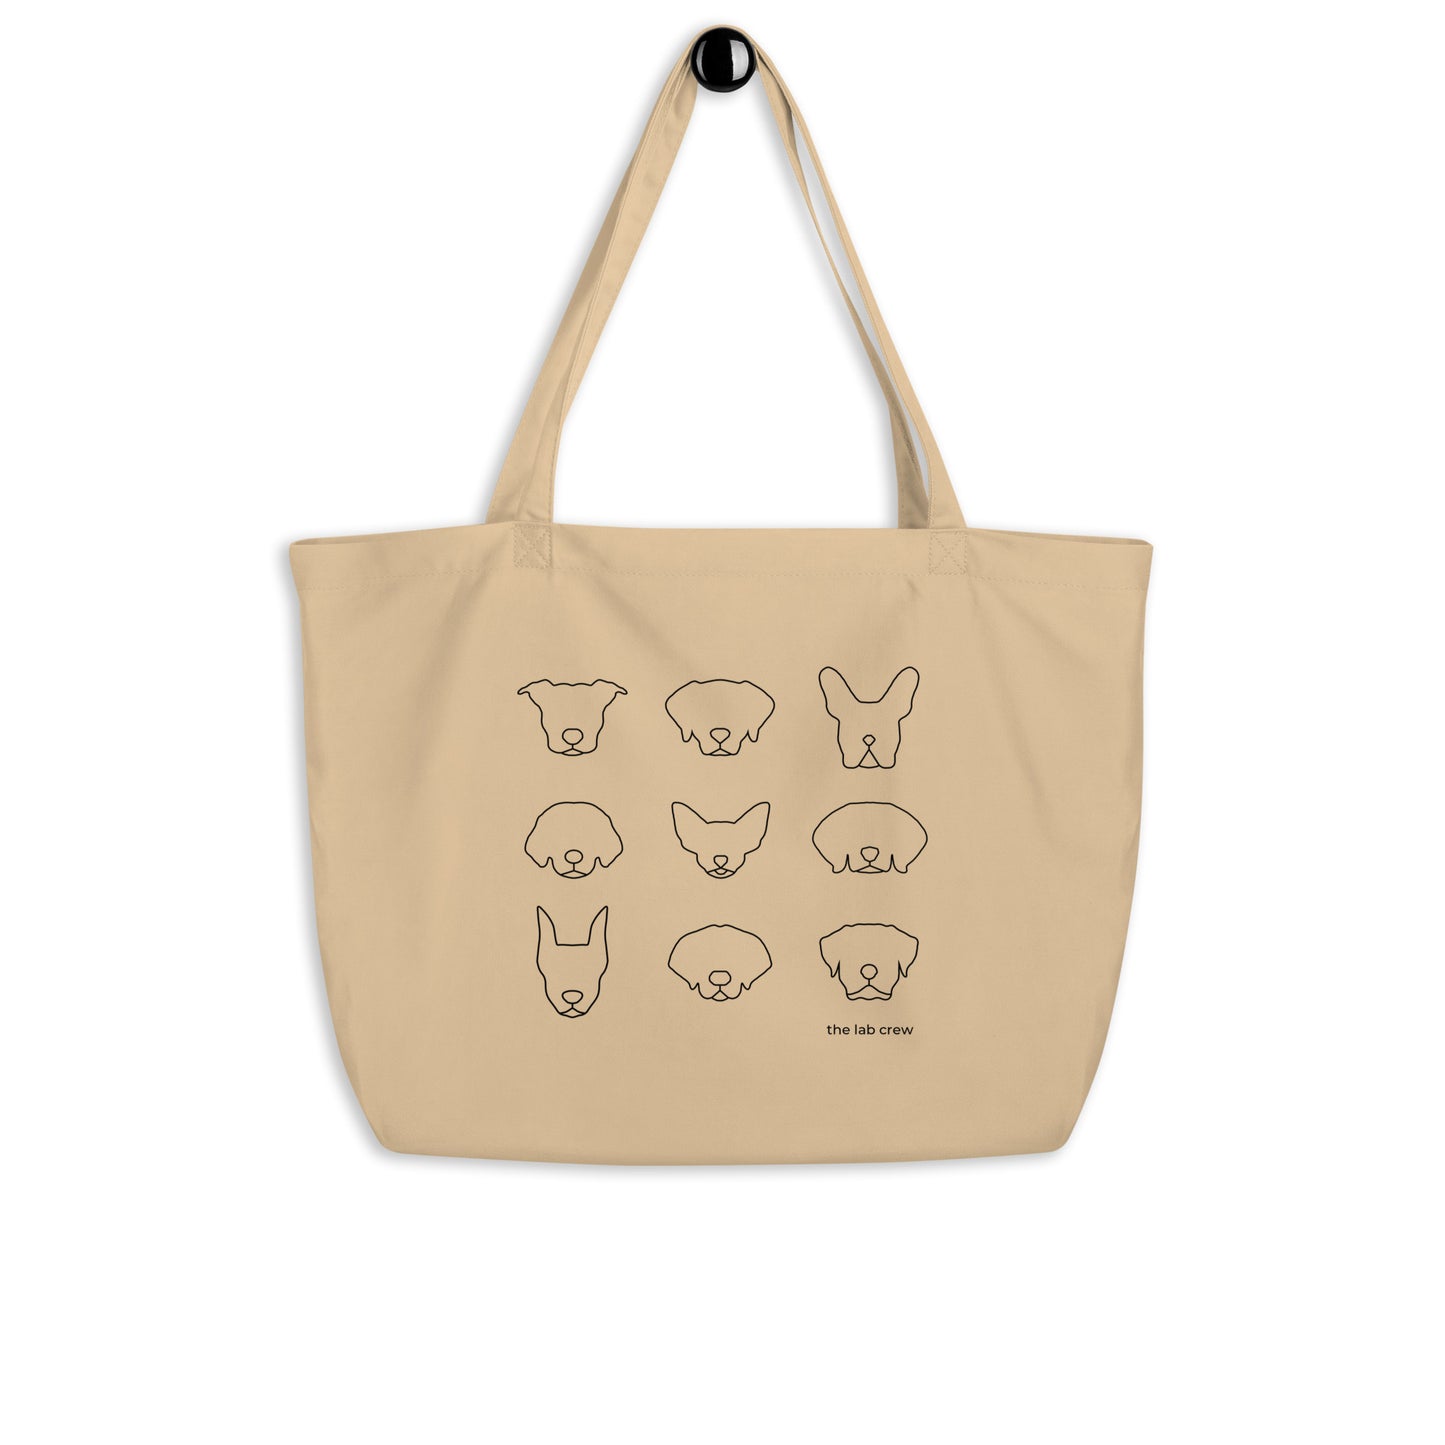 For the Love of Dogs Tote